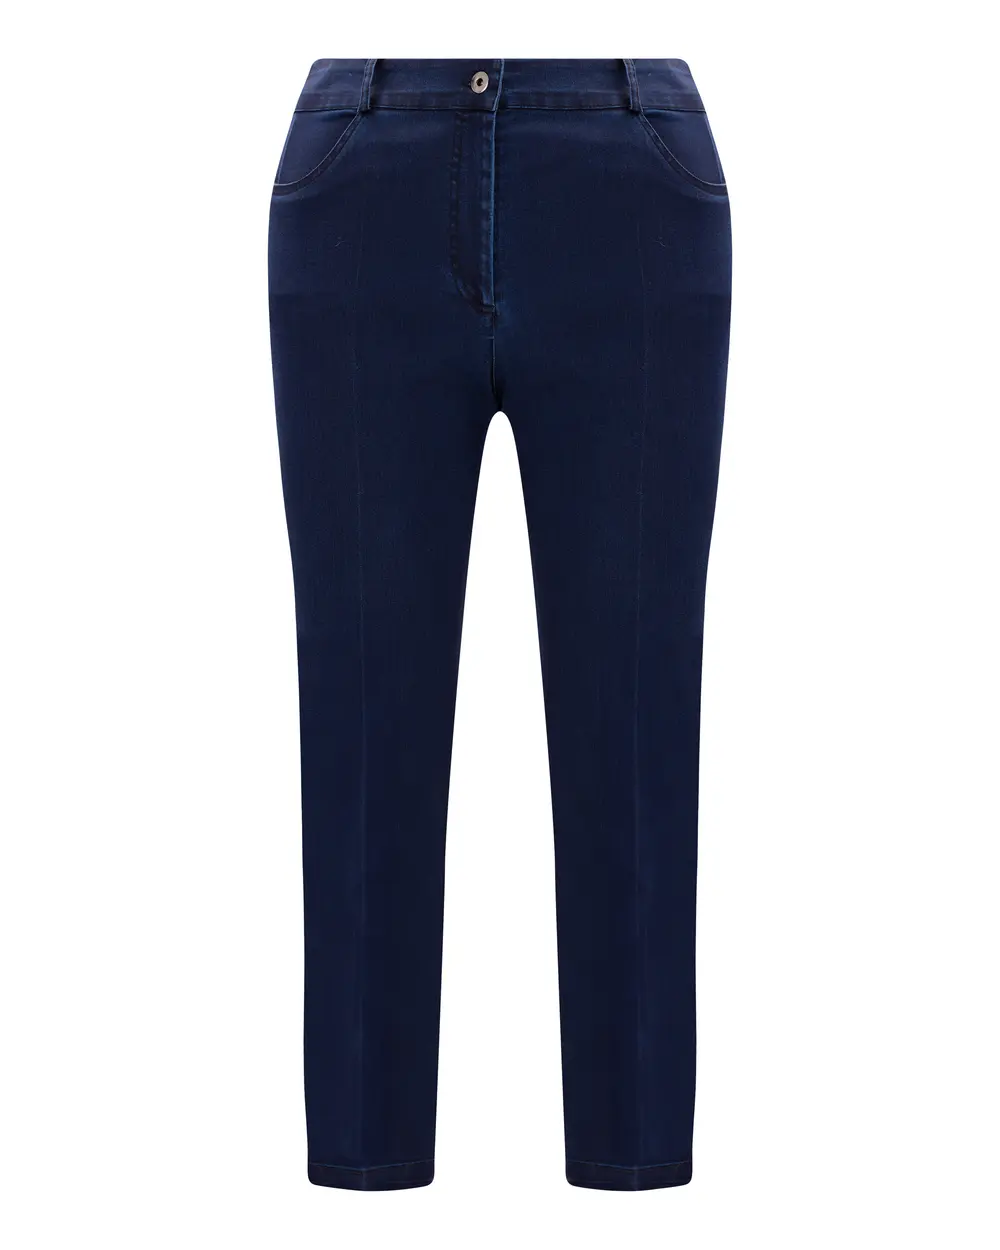 Plus Size Wide-Leg High-Waisted Jeans